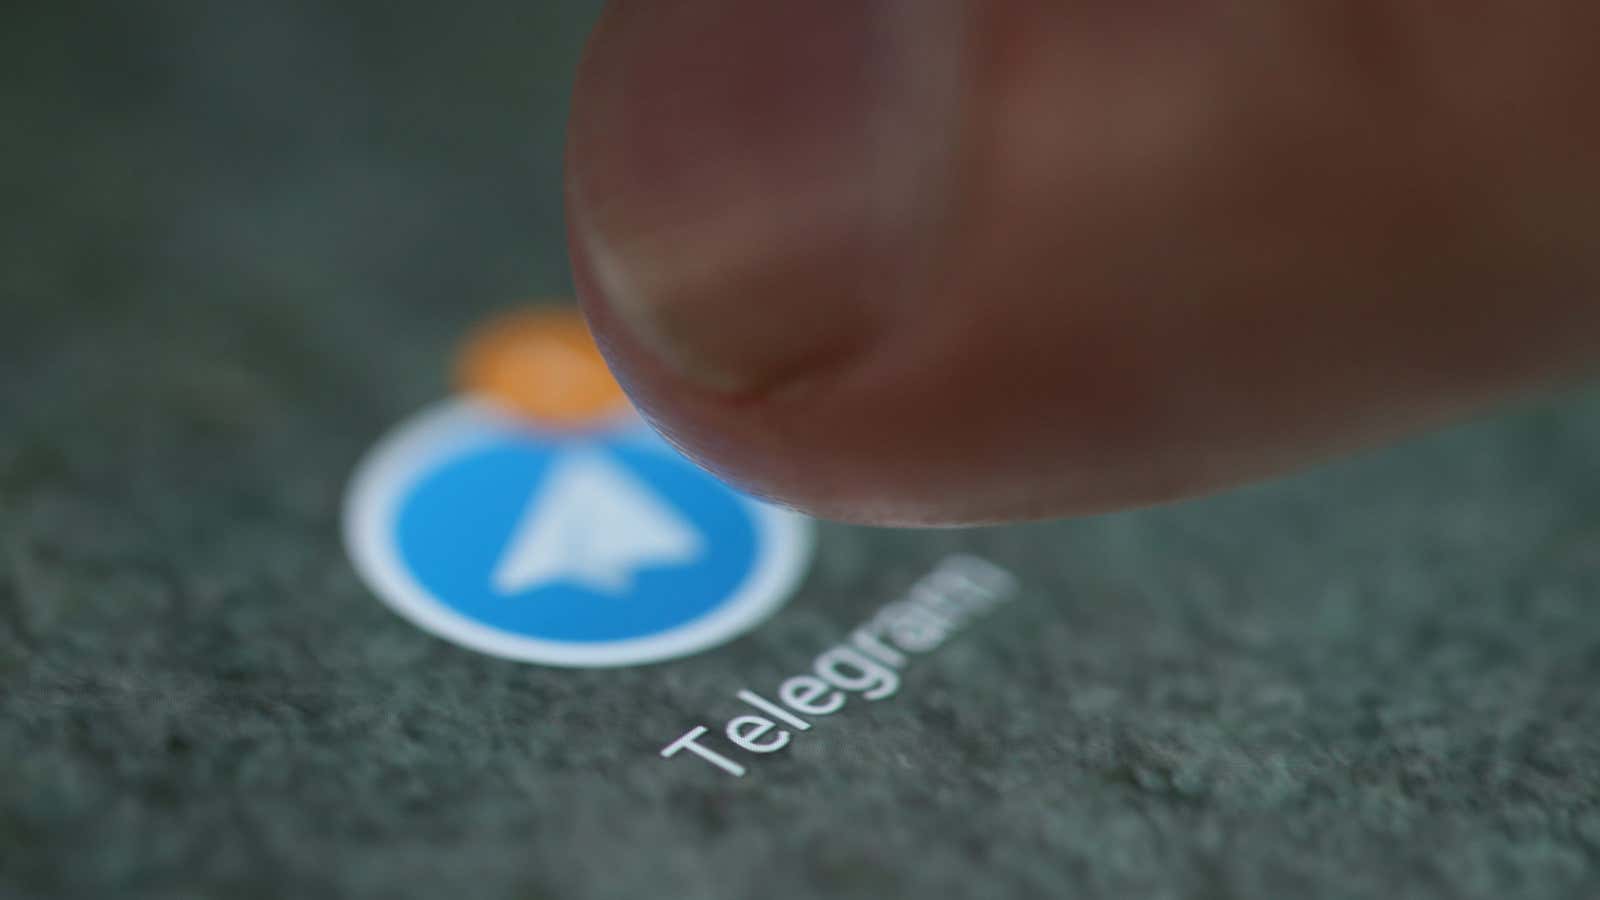 Indian School Teen Blackmail Nude Video - Korea shocked by Telegram chat room sexual abuse scandal